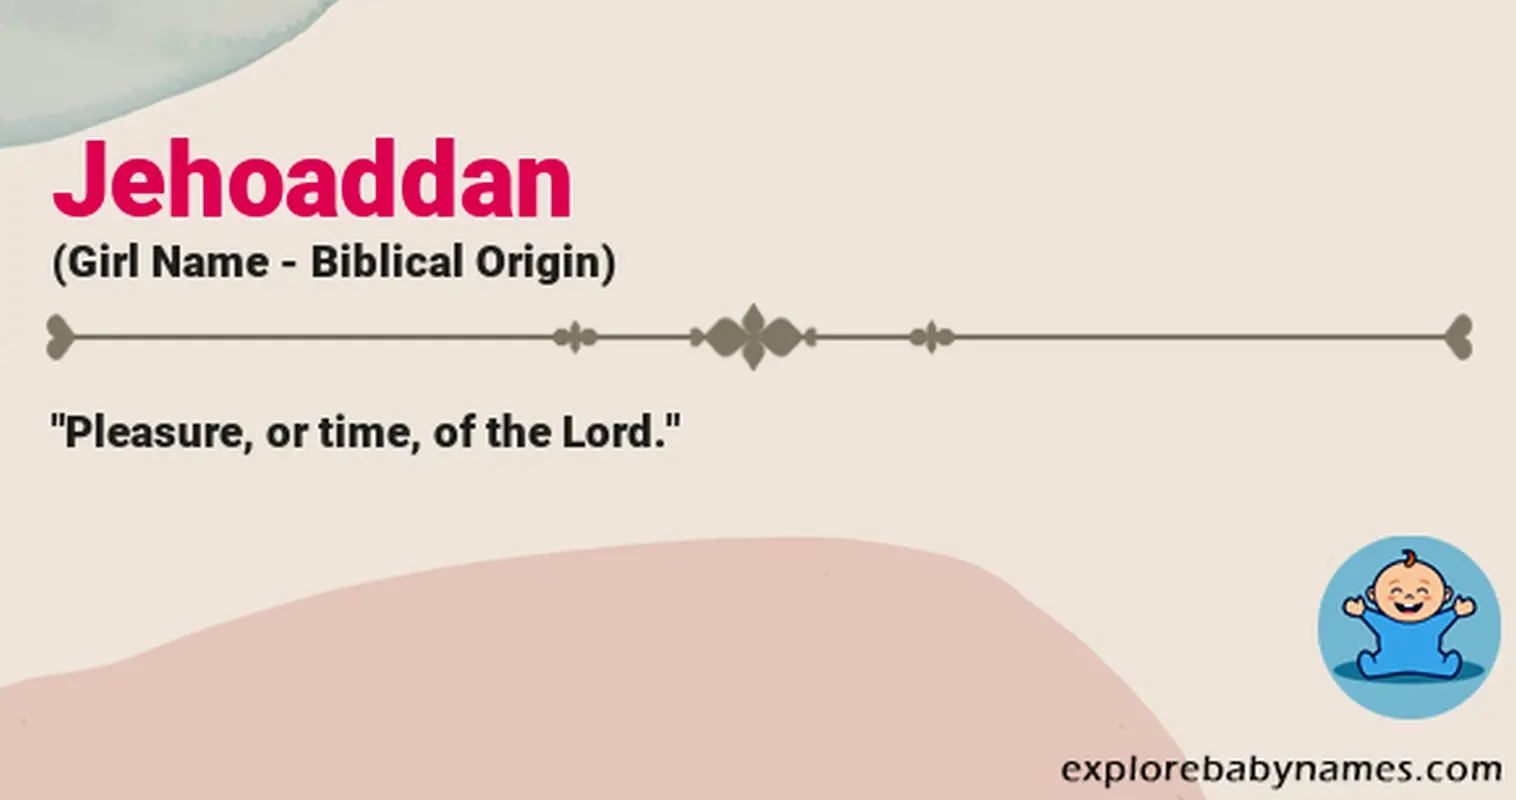 Meaning of Jehoaddan